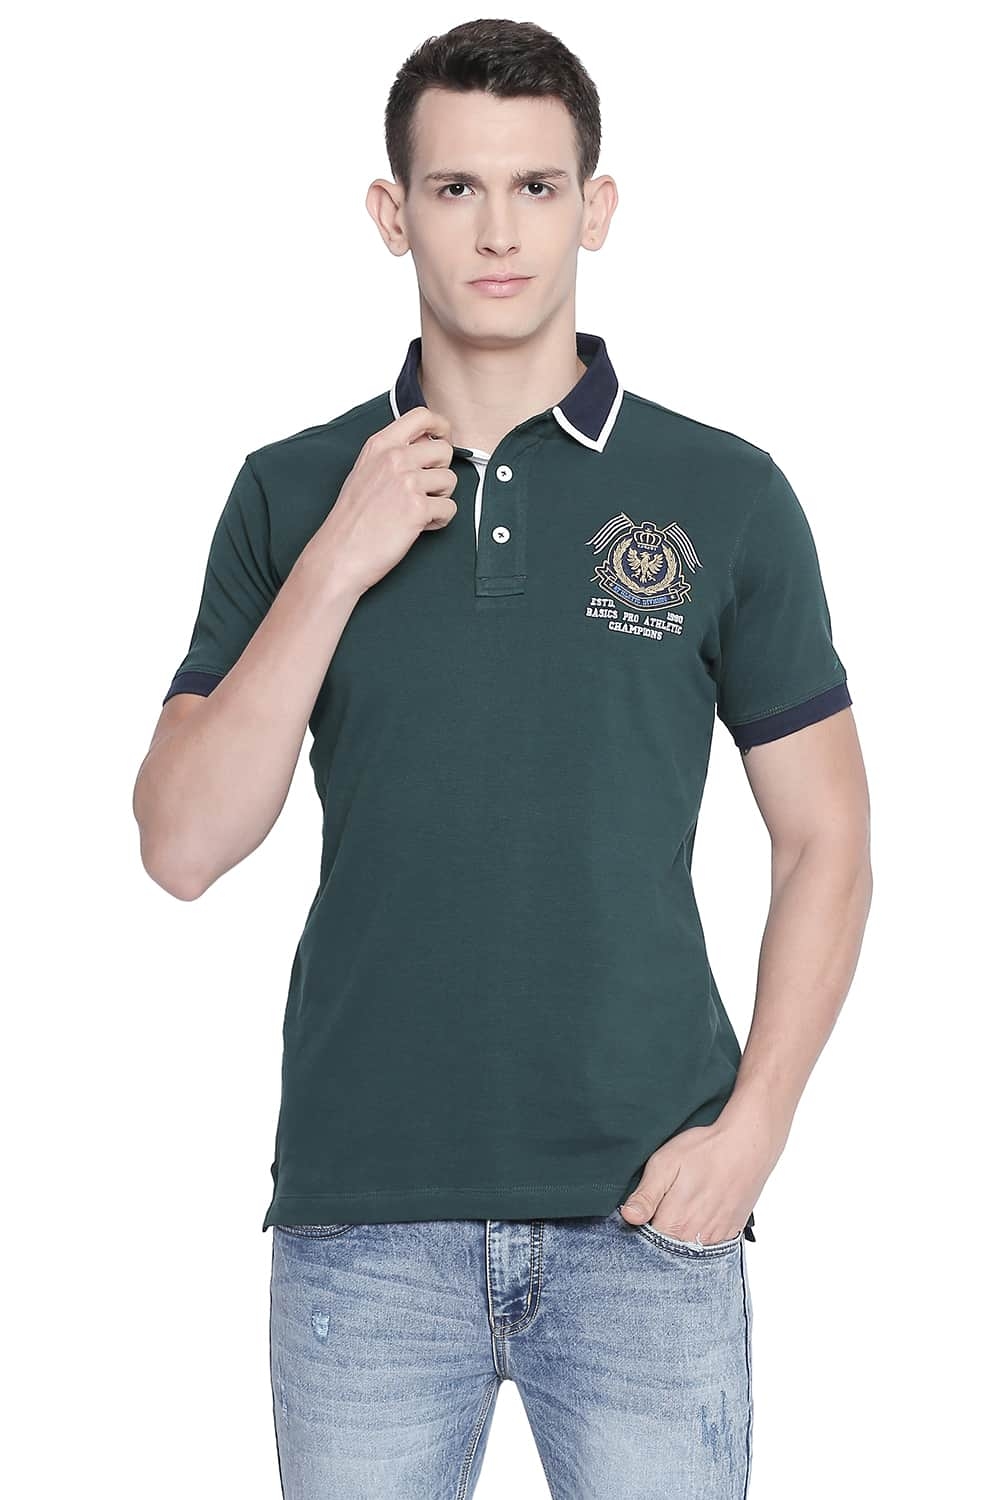 Basics | Basics Muscle Fit June Bug Rugby Polo T Shirt